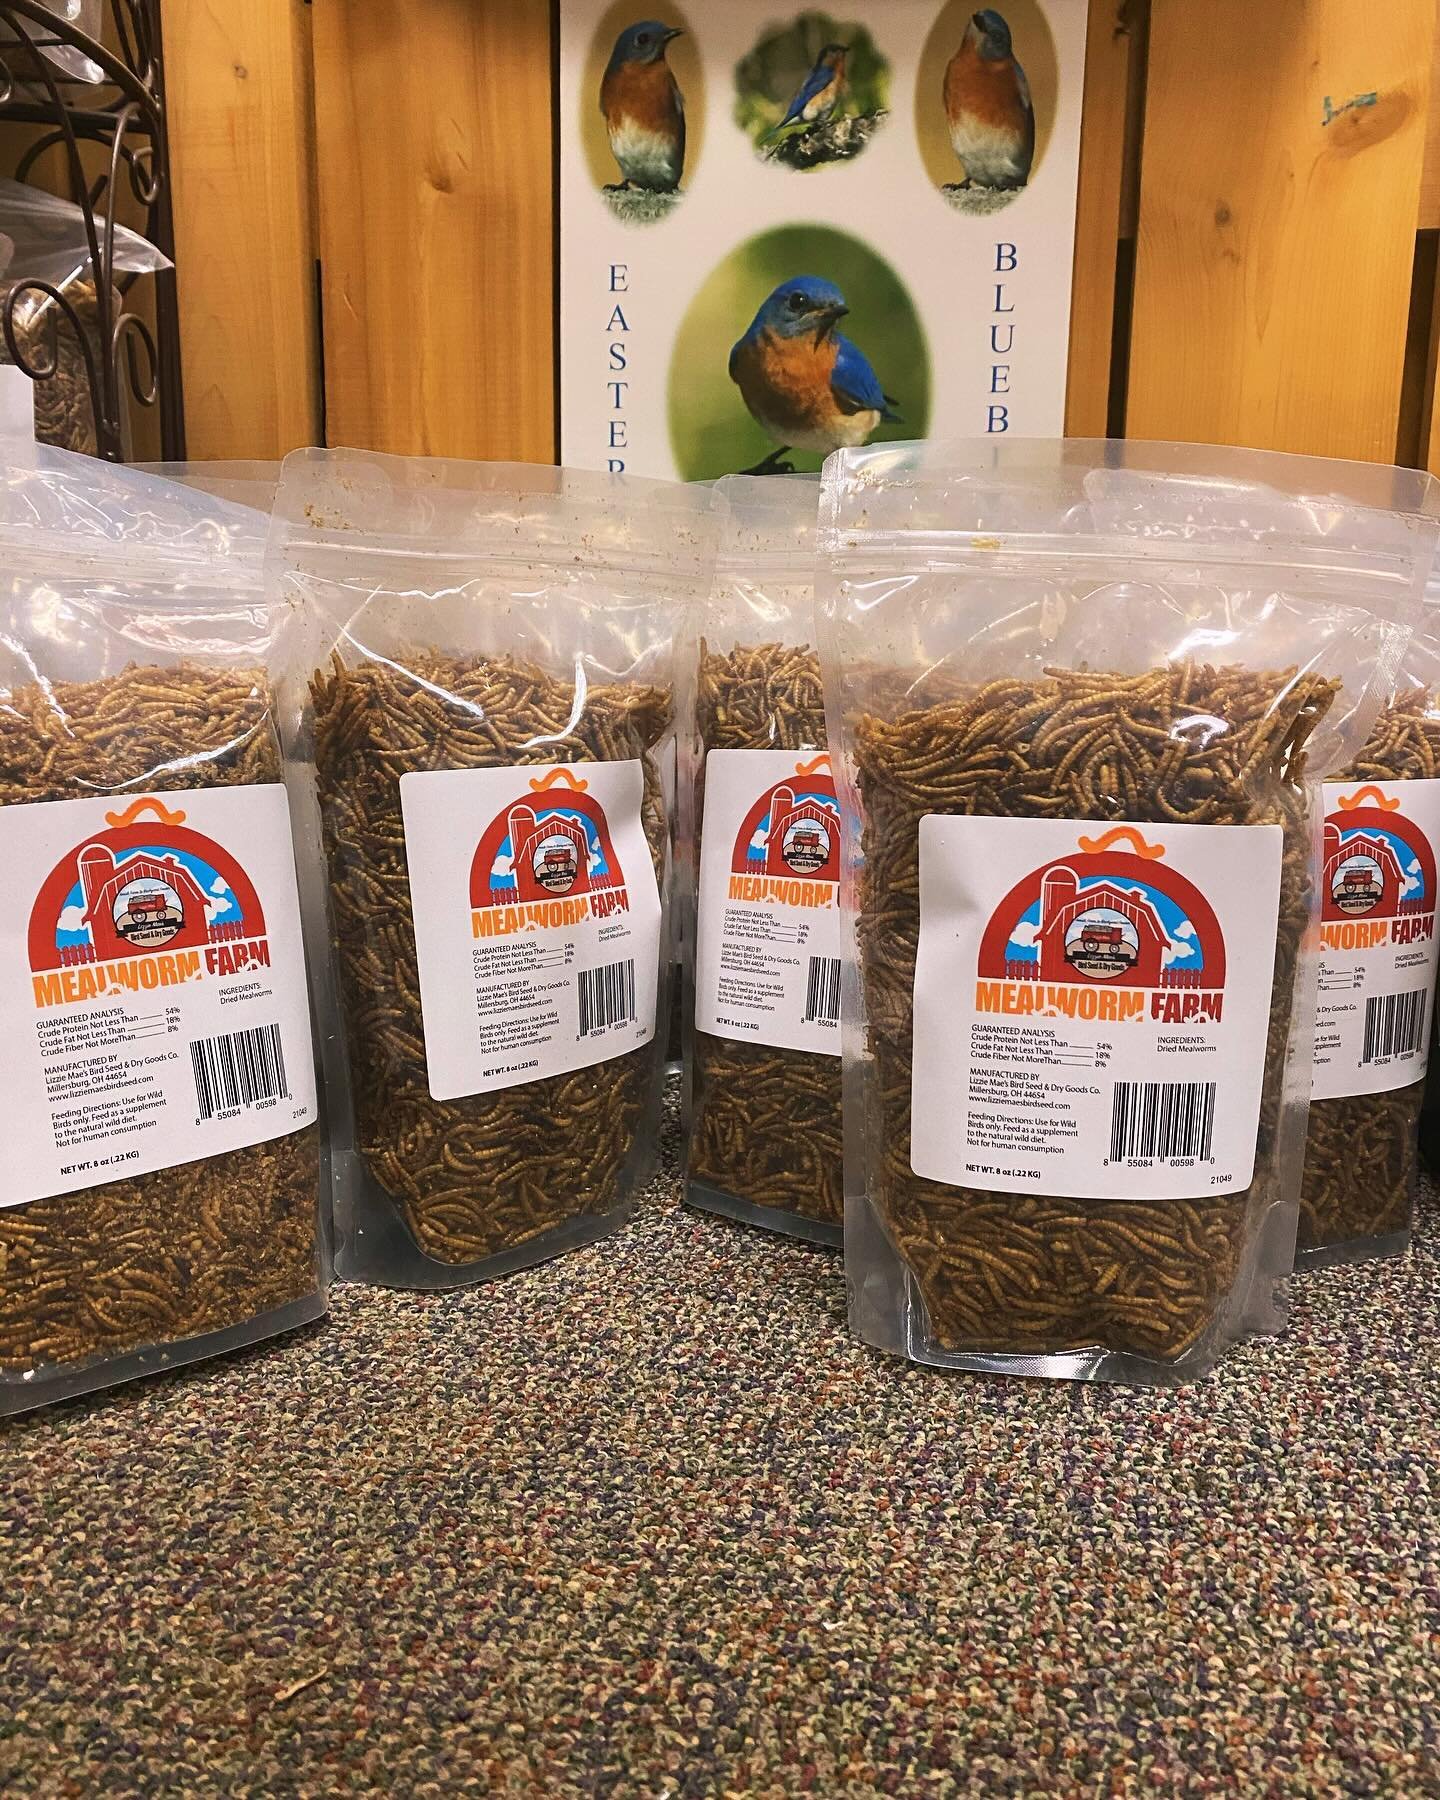 It&rsquo;s a great time of year for mealworms! Many birds will enjoy taking advantage of these at your feeder especially if you mix them in with some of your favorite seed blend, these mealworms are high in protein and can really help birds as they r